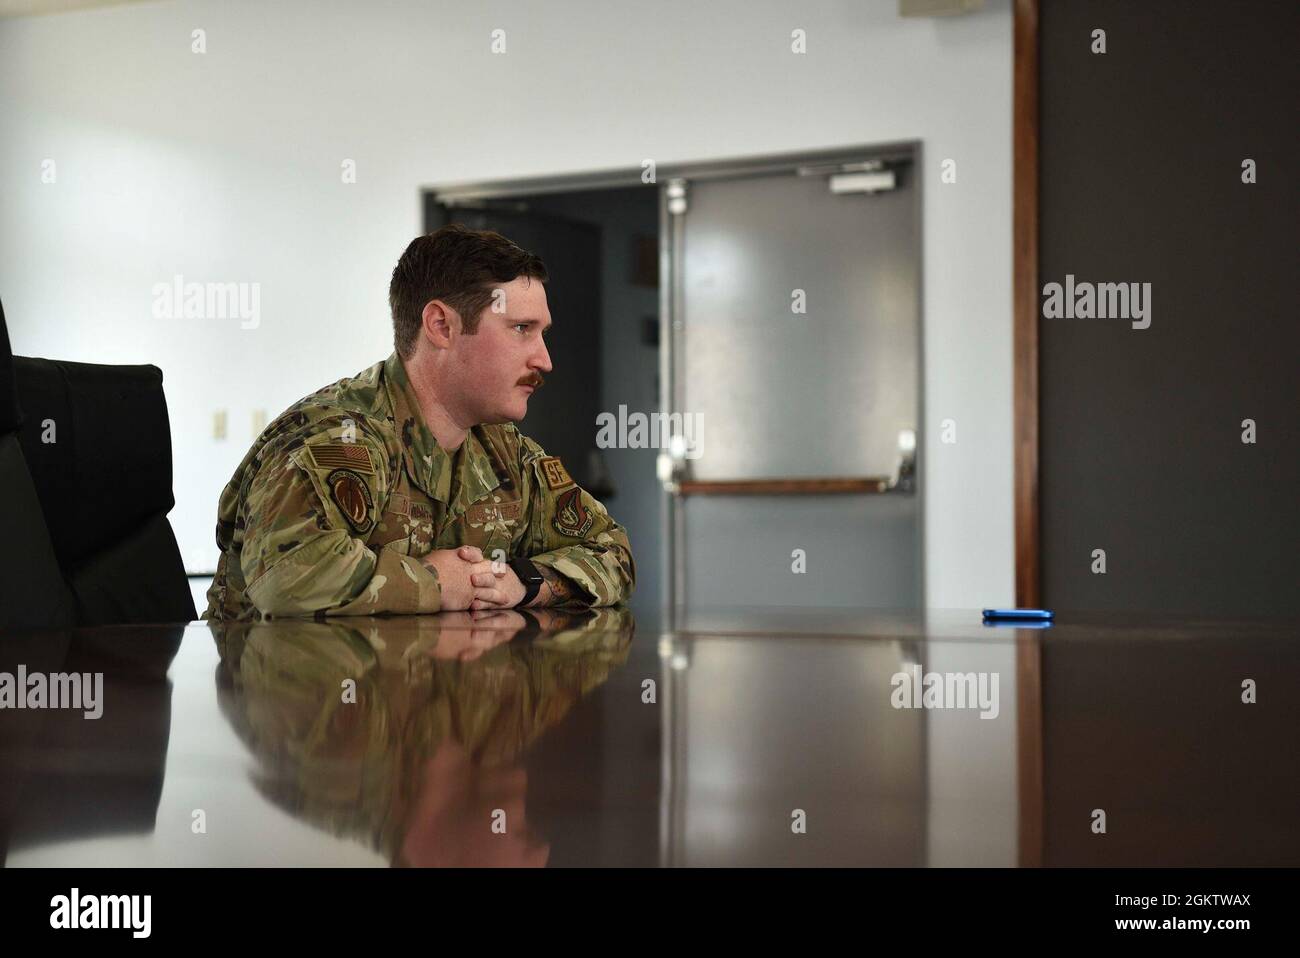 U.S. Air Force Staff Sgt. Nathaniel W. Stedman, 35th Security Forces Squadron base defense operations center controller/patrolman, gives an interview after being coined at Misawa Air Base, Japan, July 1, 2021. Stedman received a coin from Col. Jesse J. Friedel, 35th Fighter Wing commander, for saving a little girl from the water at the base’s beach. Stock Photo